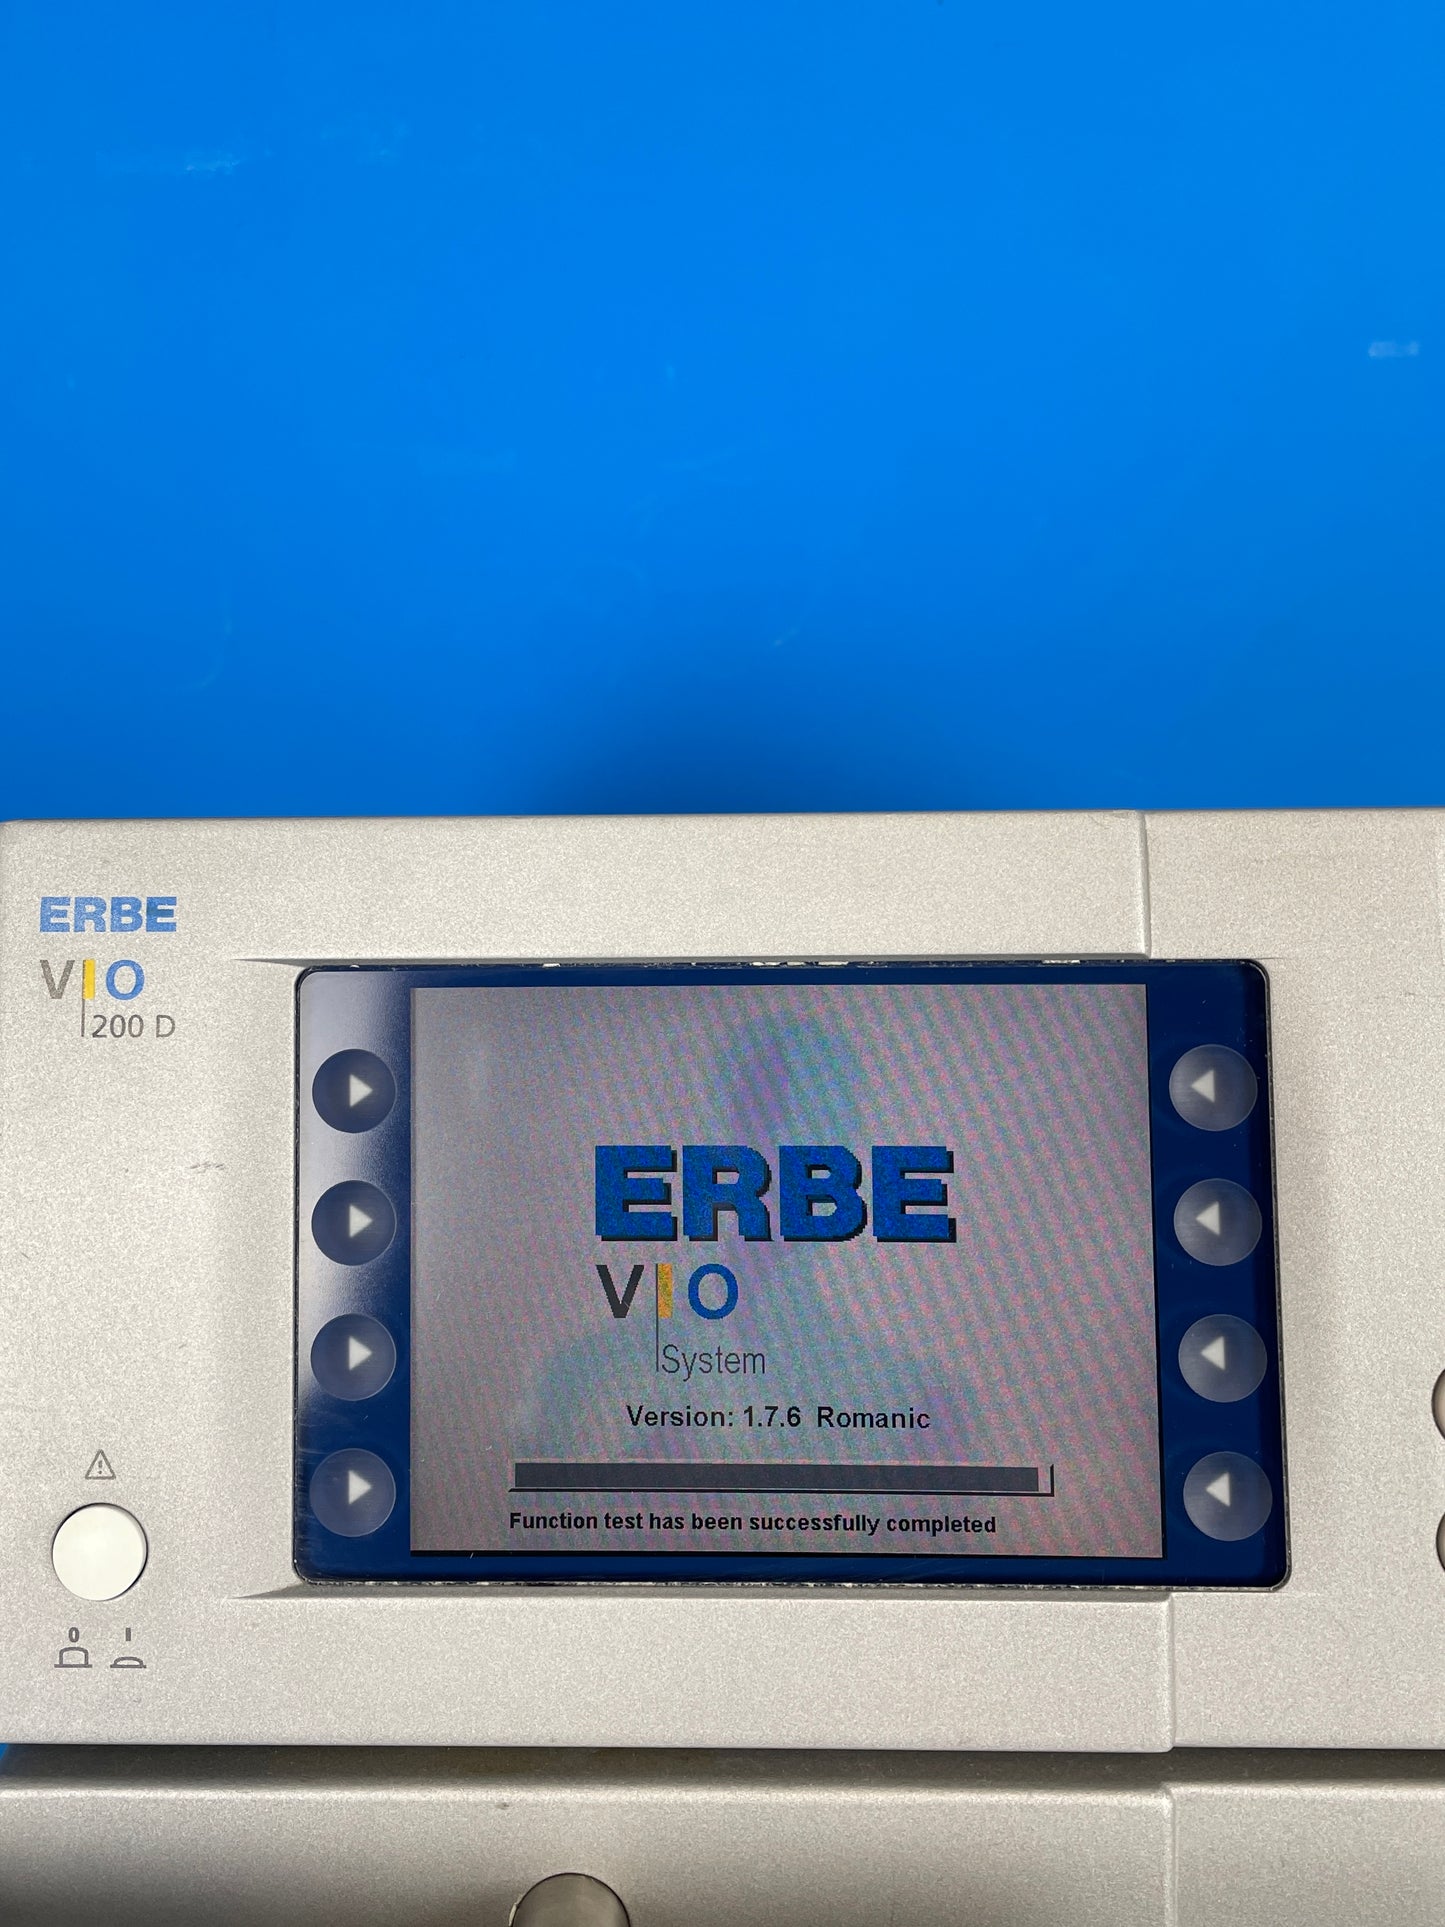 Erbe VIO 200D Electrosurgical Unit with Footswitch On Cart